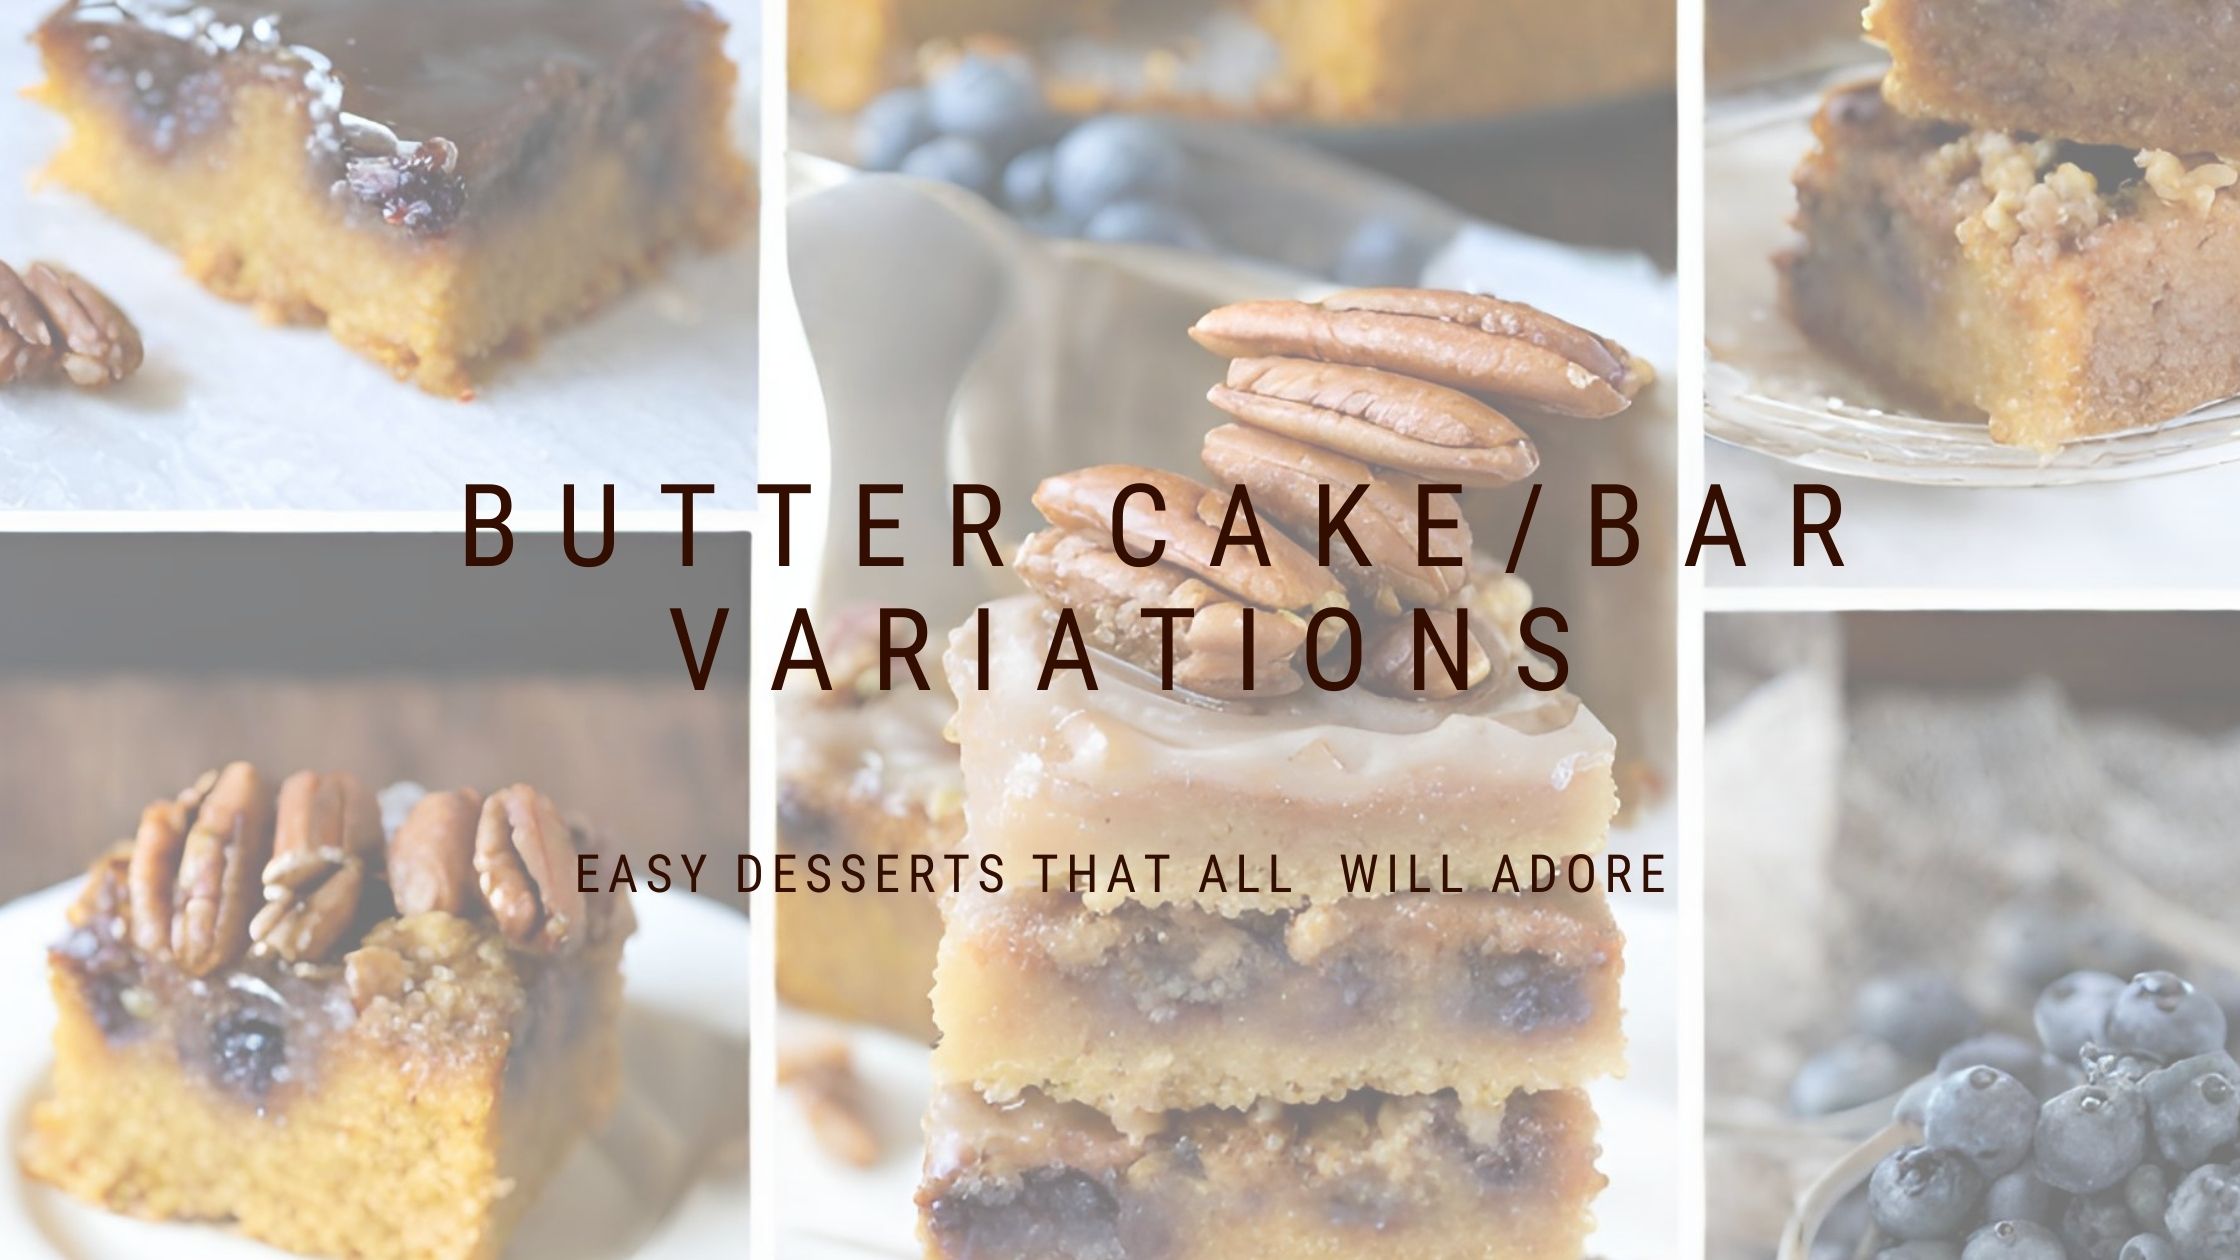 Butter Bars/Cakes and their delicious variations!